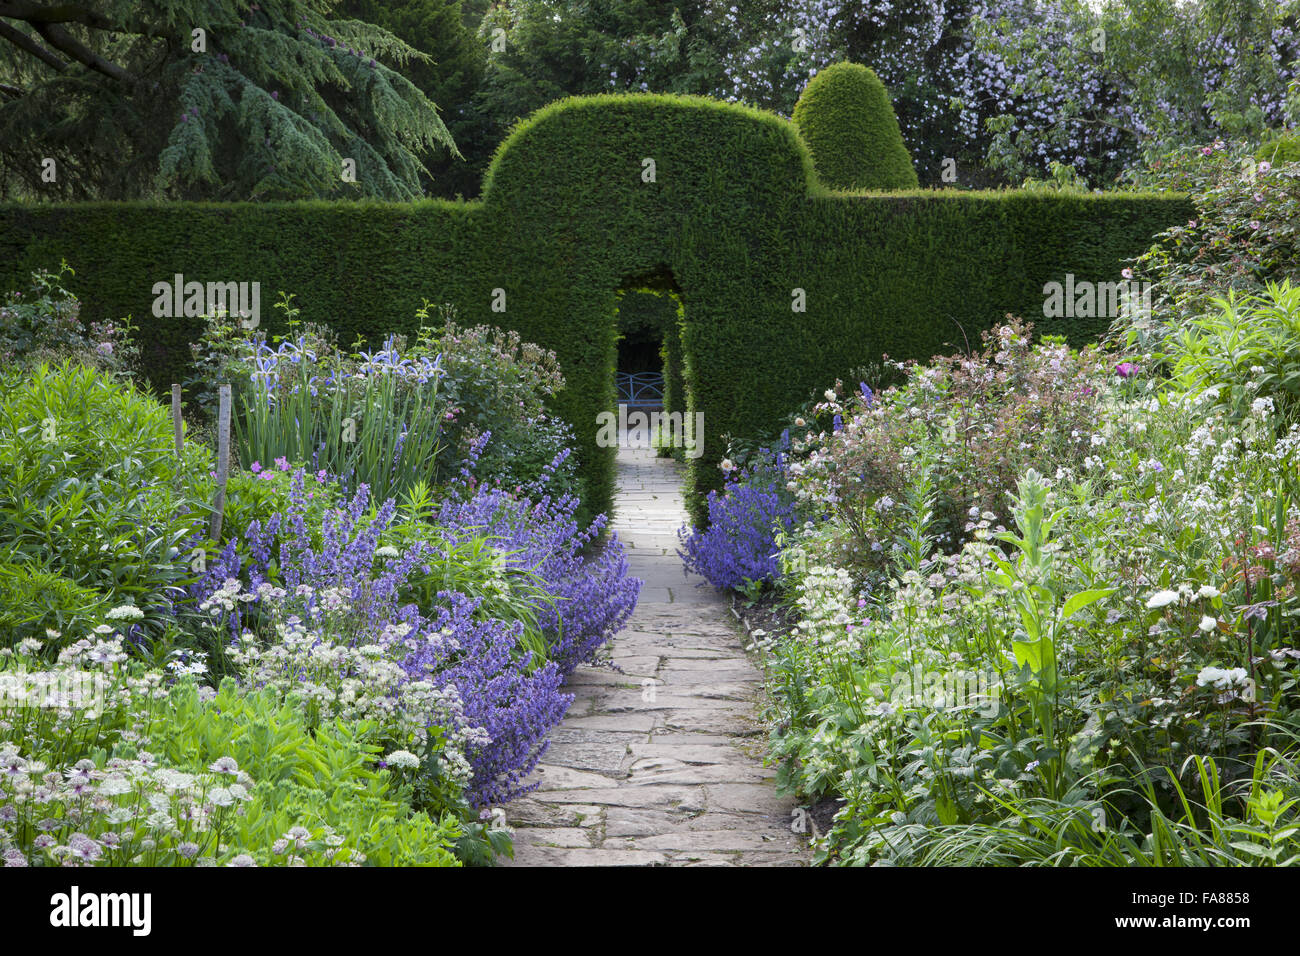 Nepeta, astrantia and iris in The Old Garden at Hidcote, Gloucestershire, in June. View through yew hedge arches to blue seat. Stock Photo